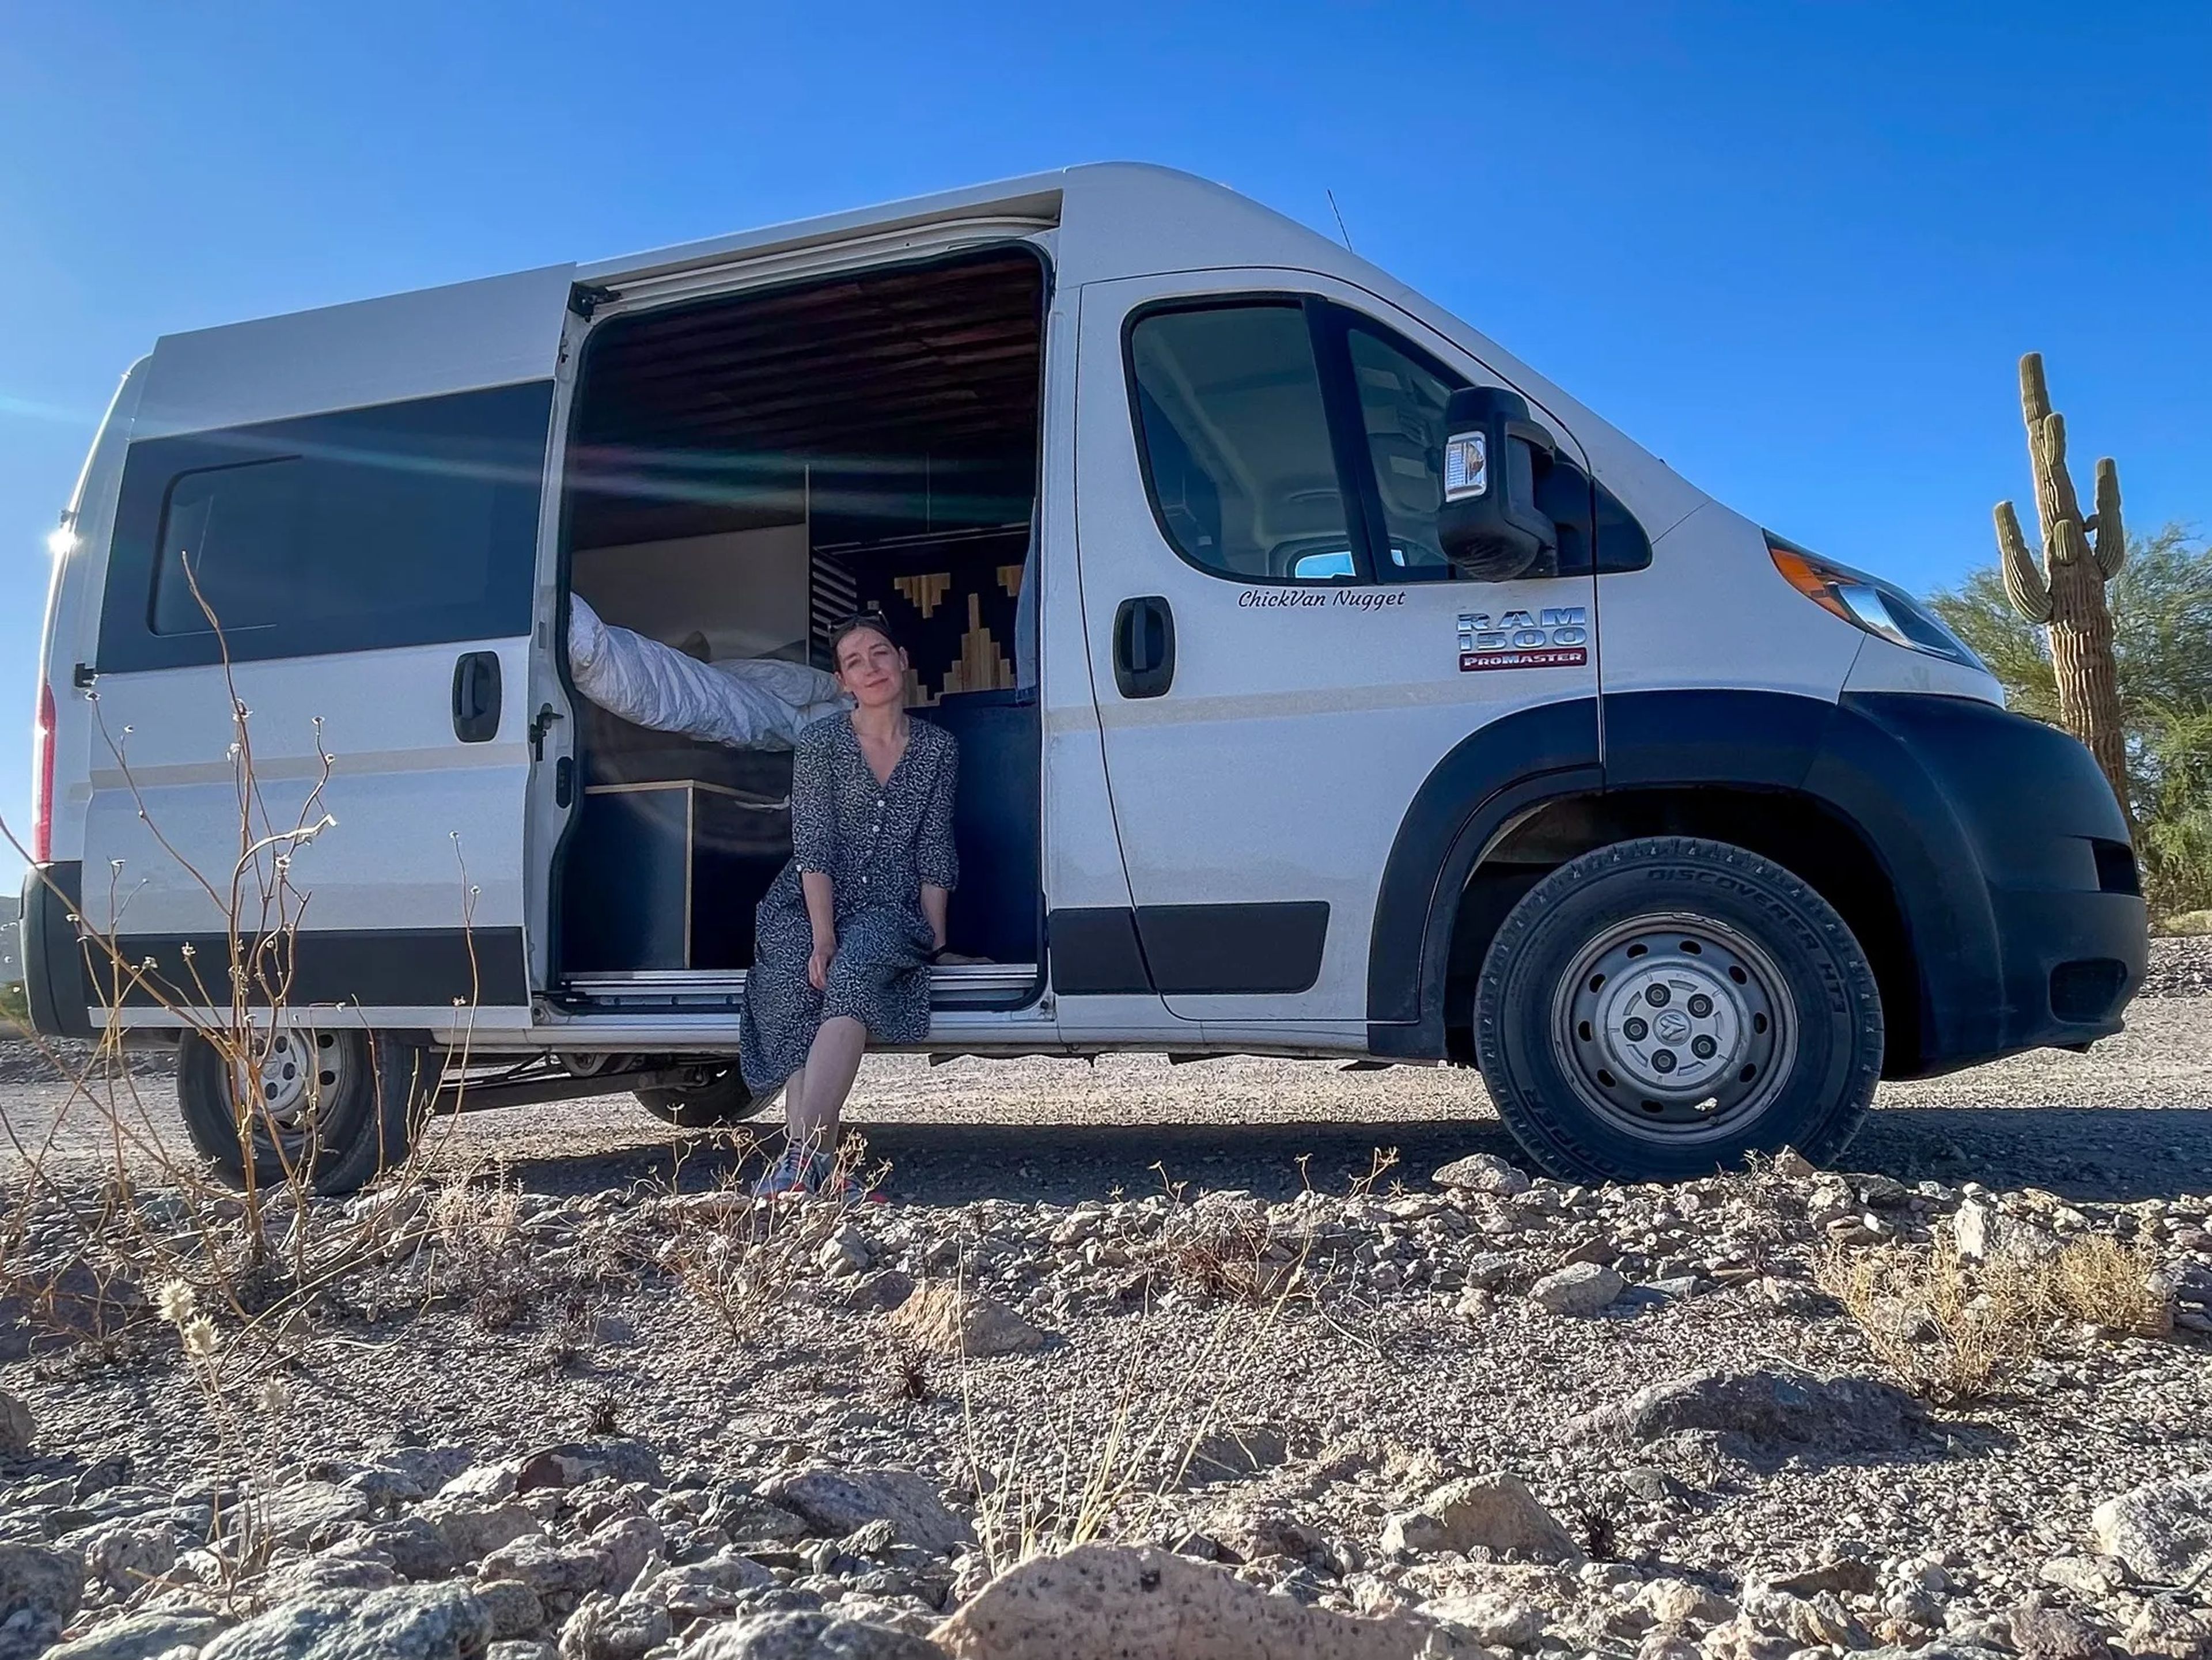 Business Insider's author outside the van she rented for two weeks.